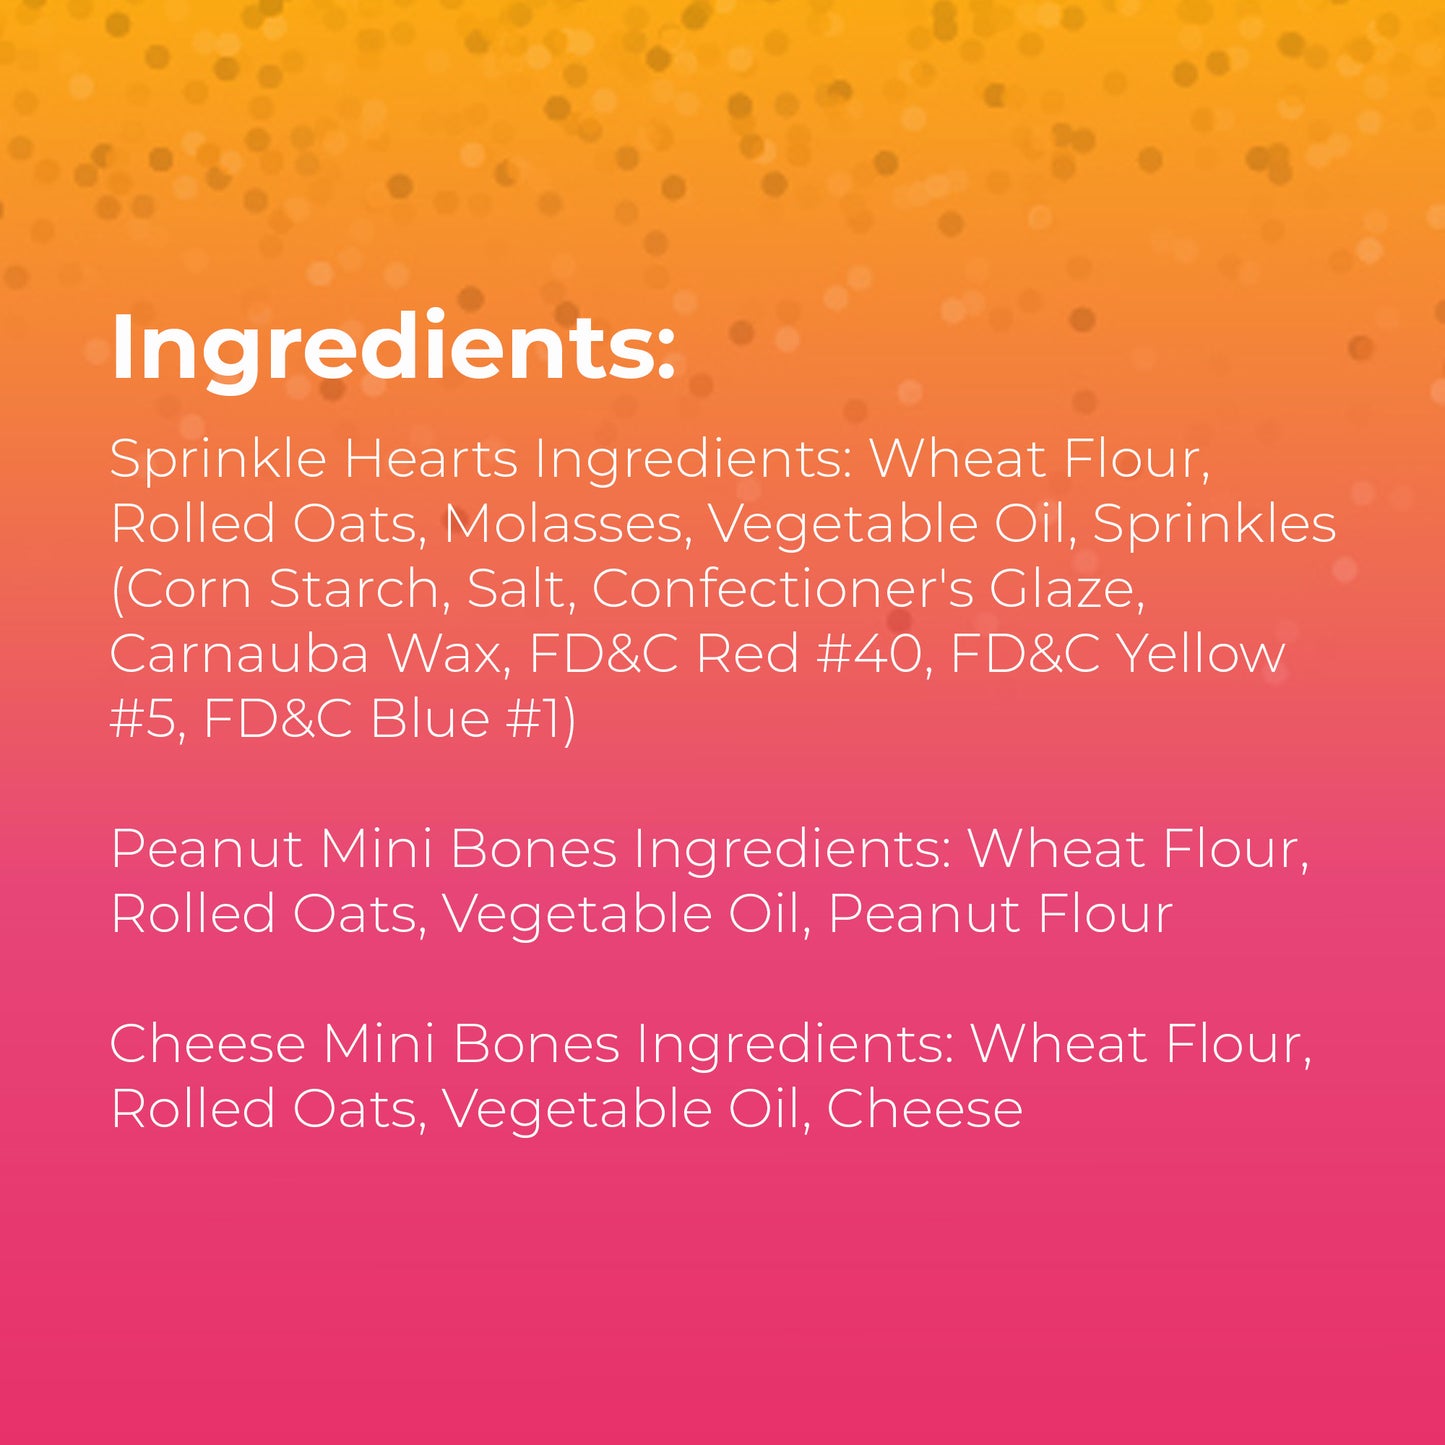 Ingredients listed.